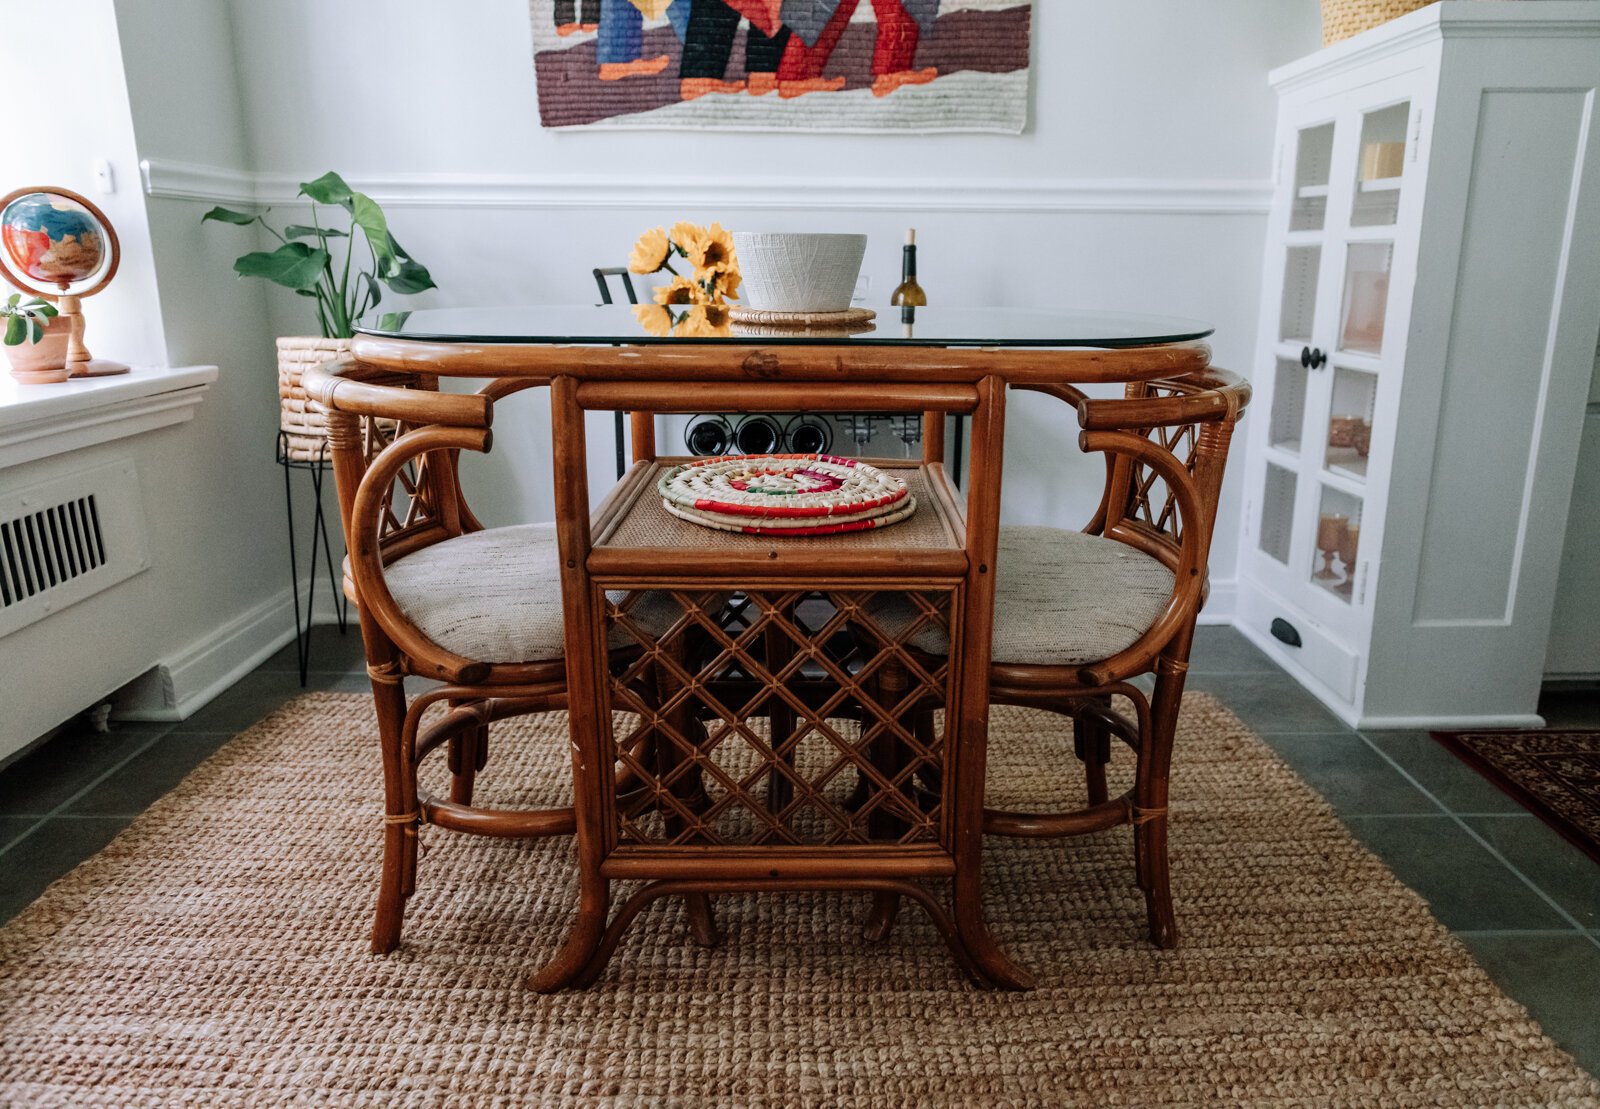 A table purchased from the Salvation Army fits well in the dining space in the apartment of Jamie Curtis.